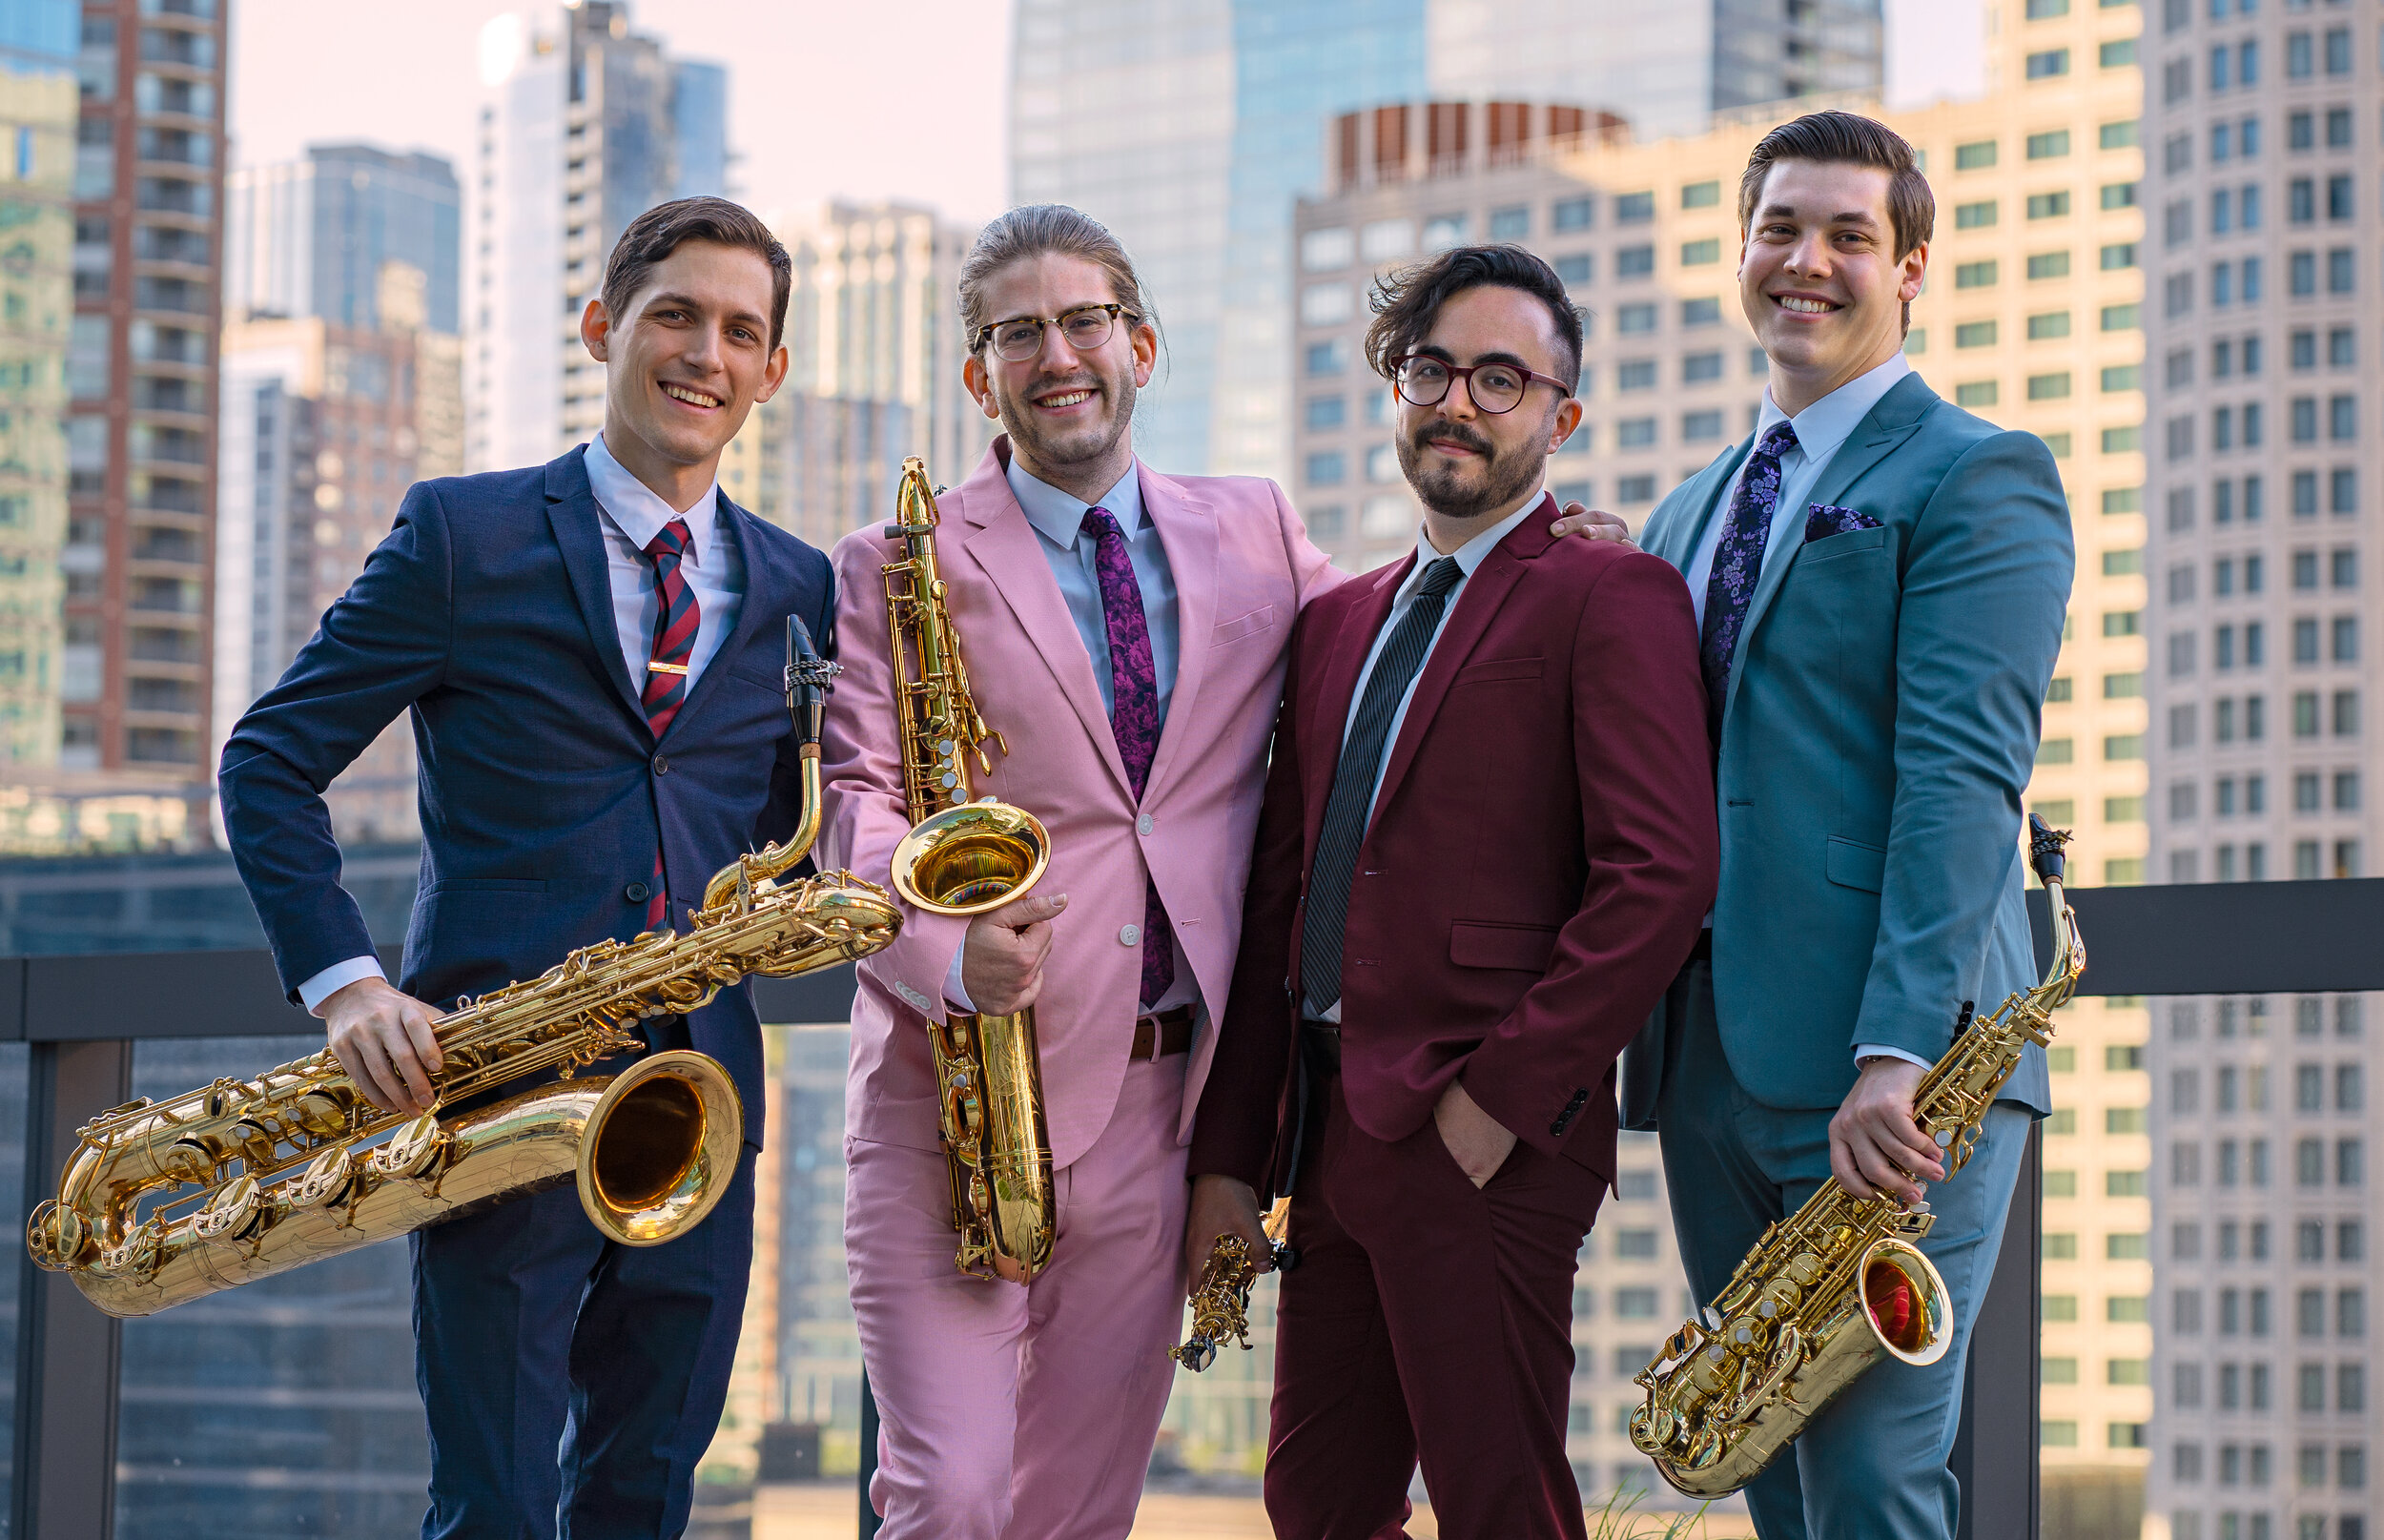 for members of the ~Nois saxophone ensemble. Each member is standing and holding a saxophone, with a blurred city skyline in the background.